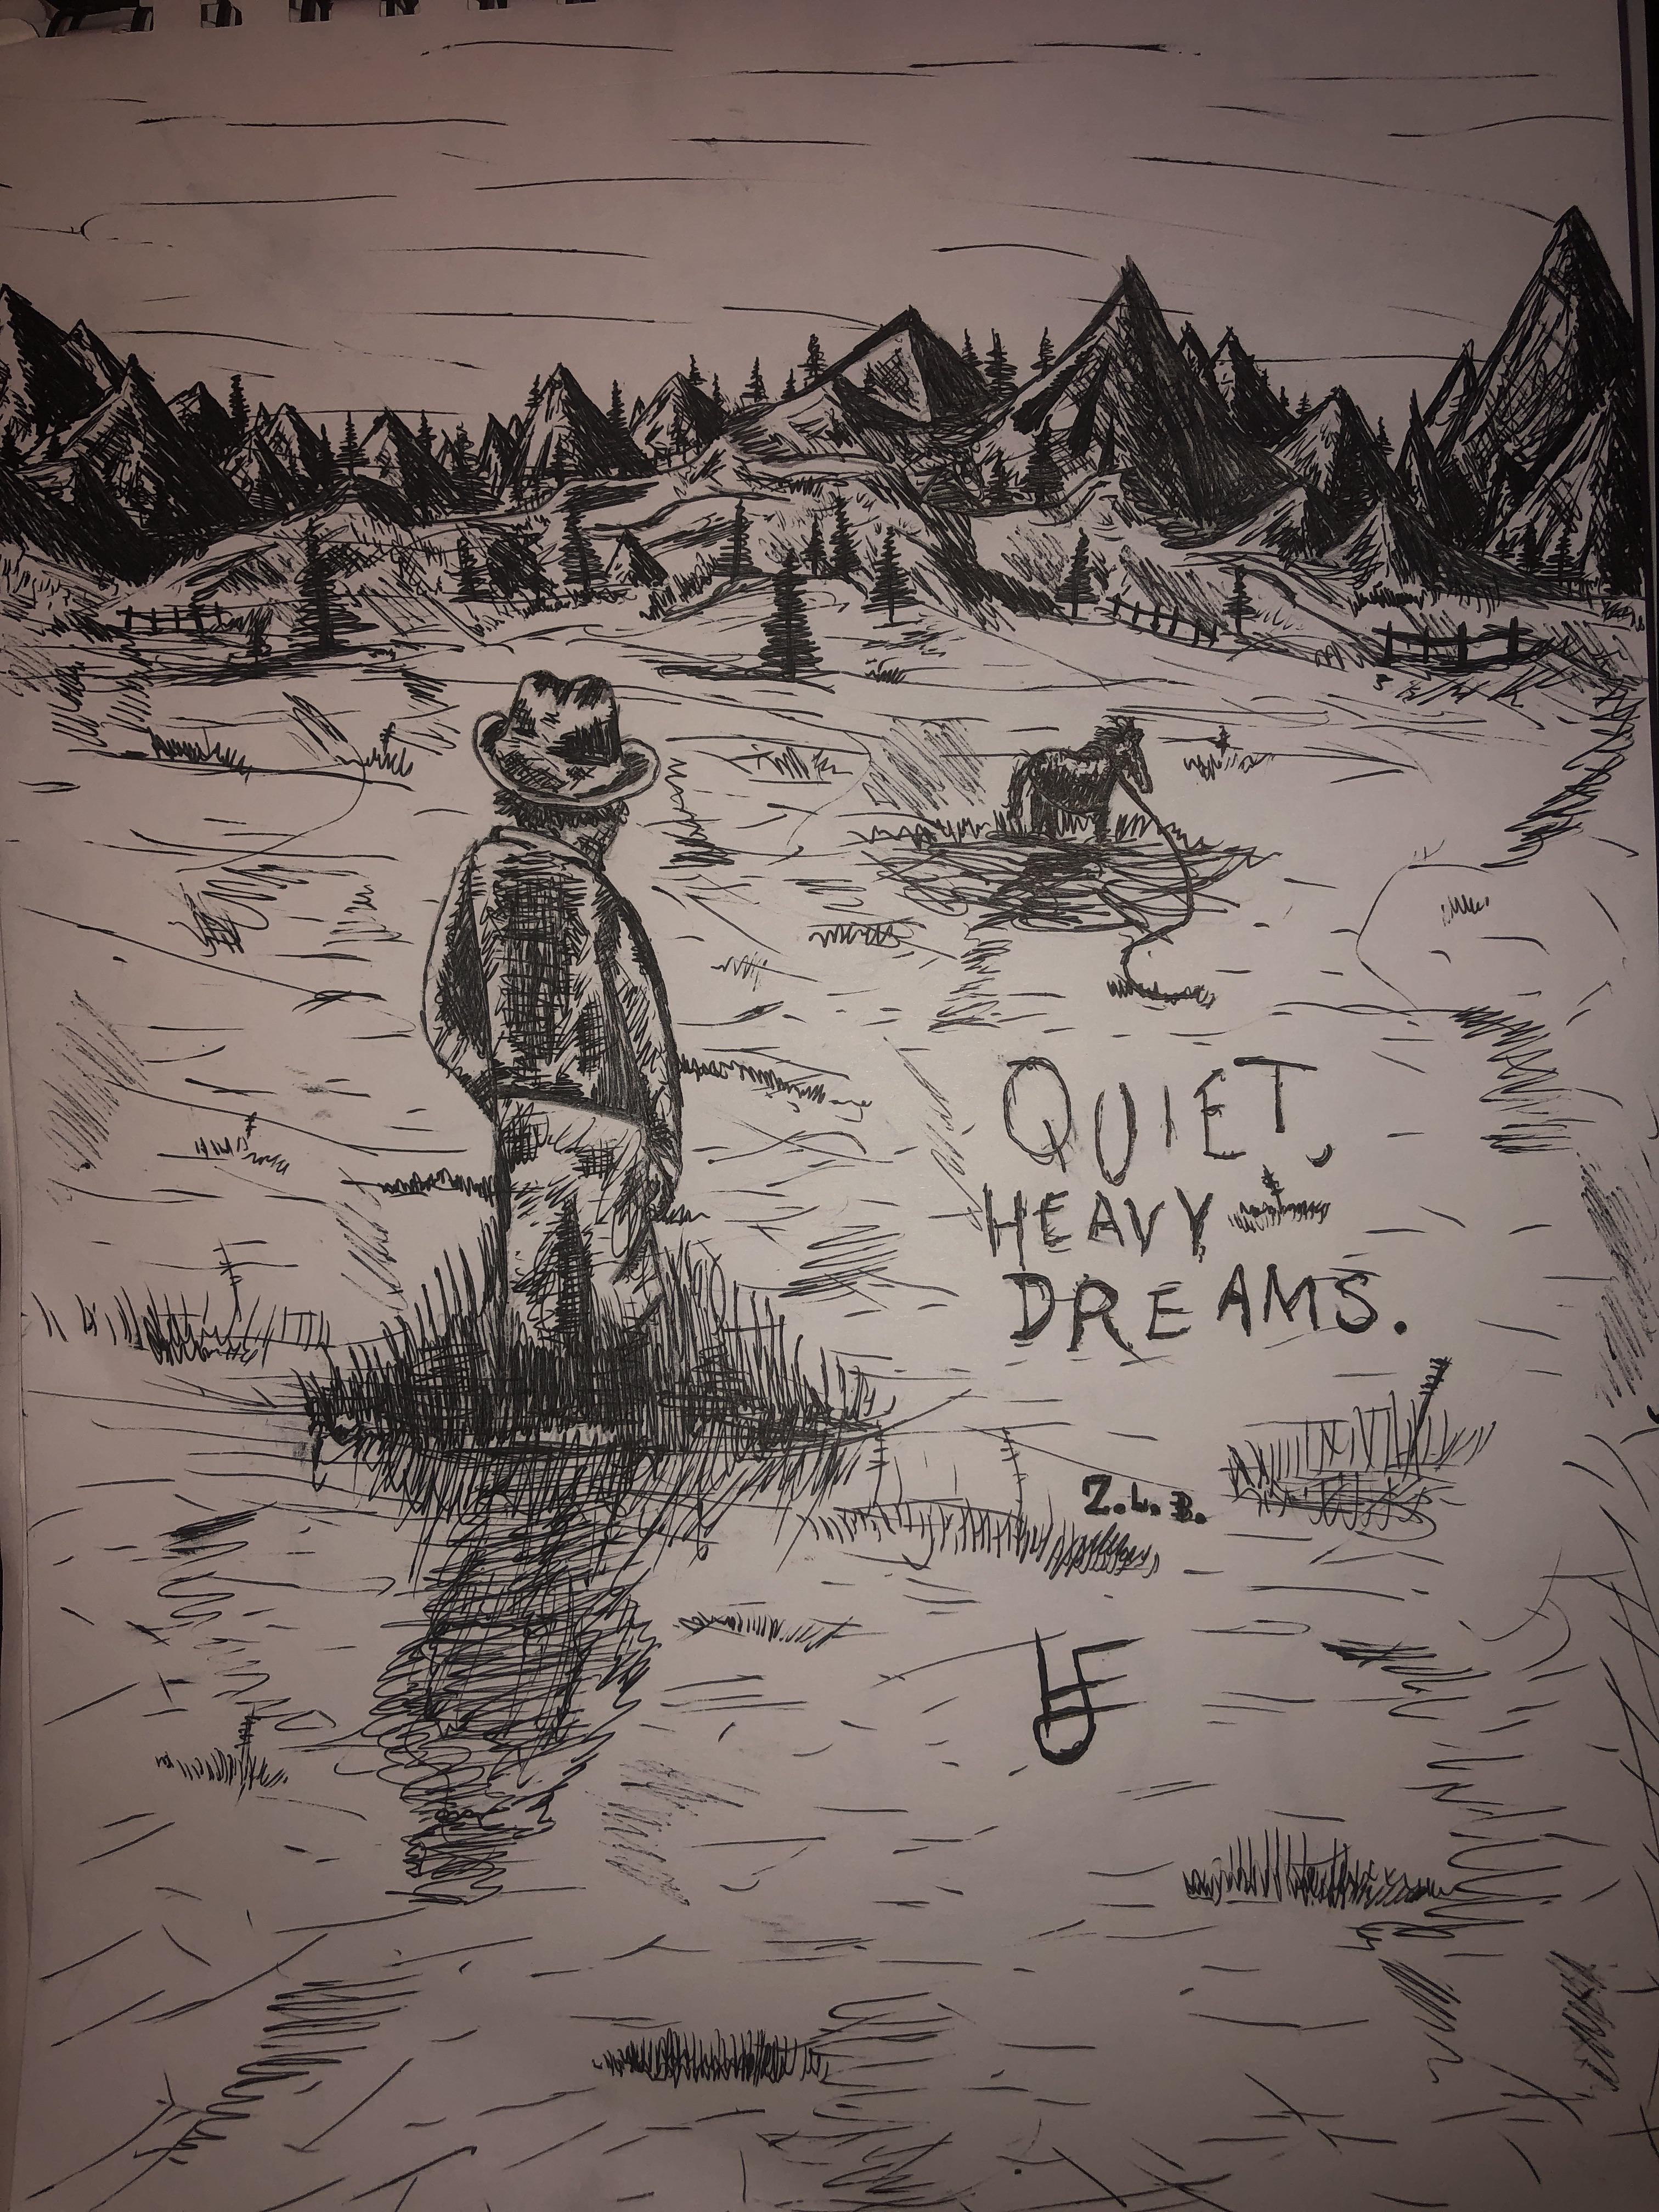 I added onto the Quiet Heavy Dreams cover